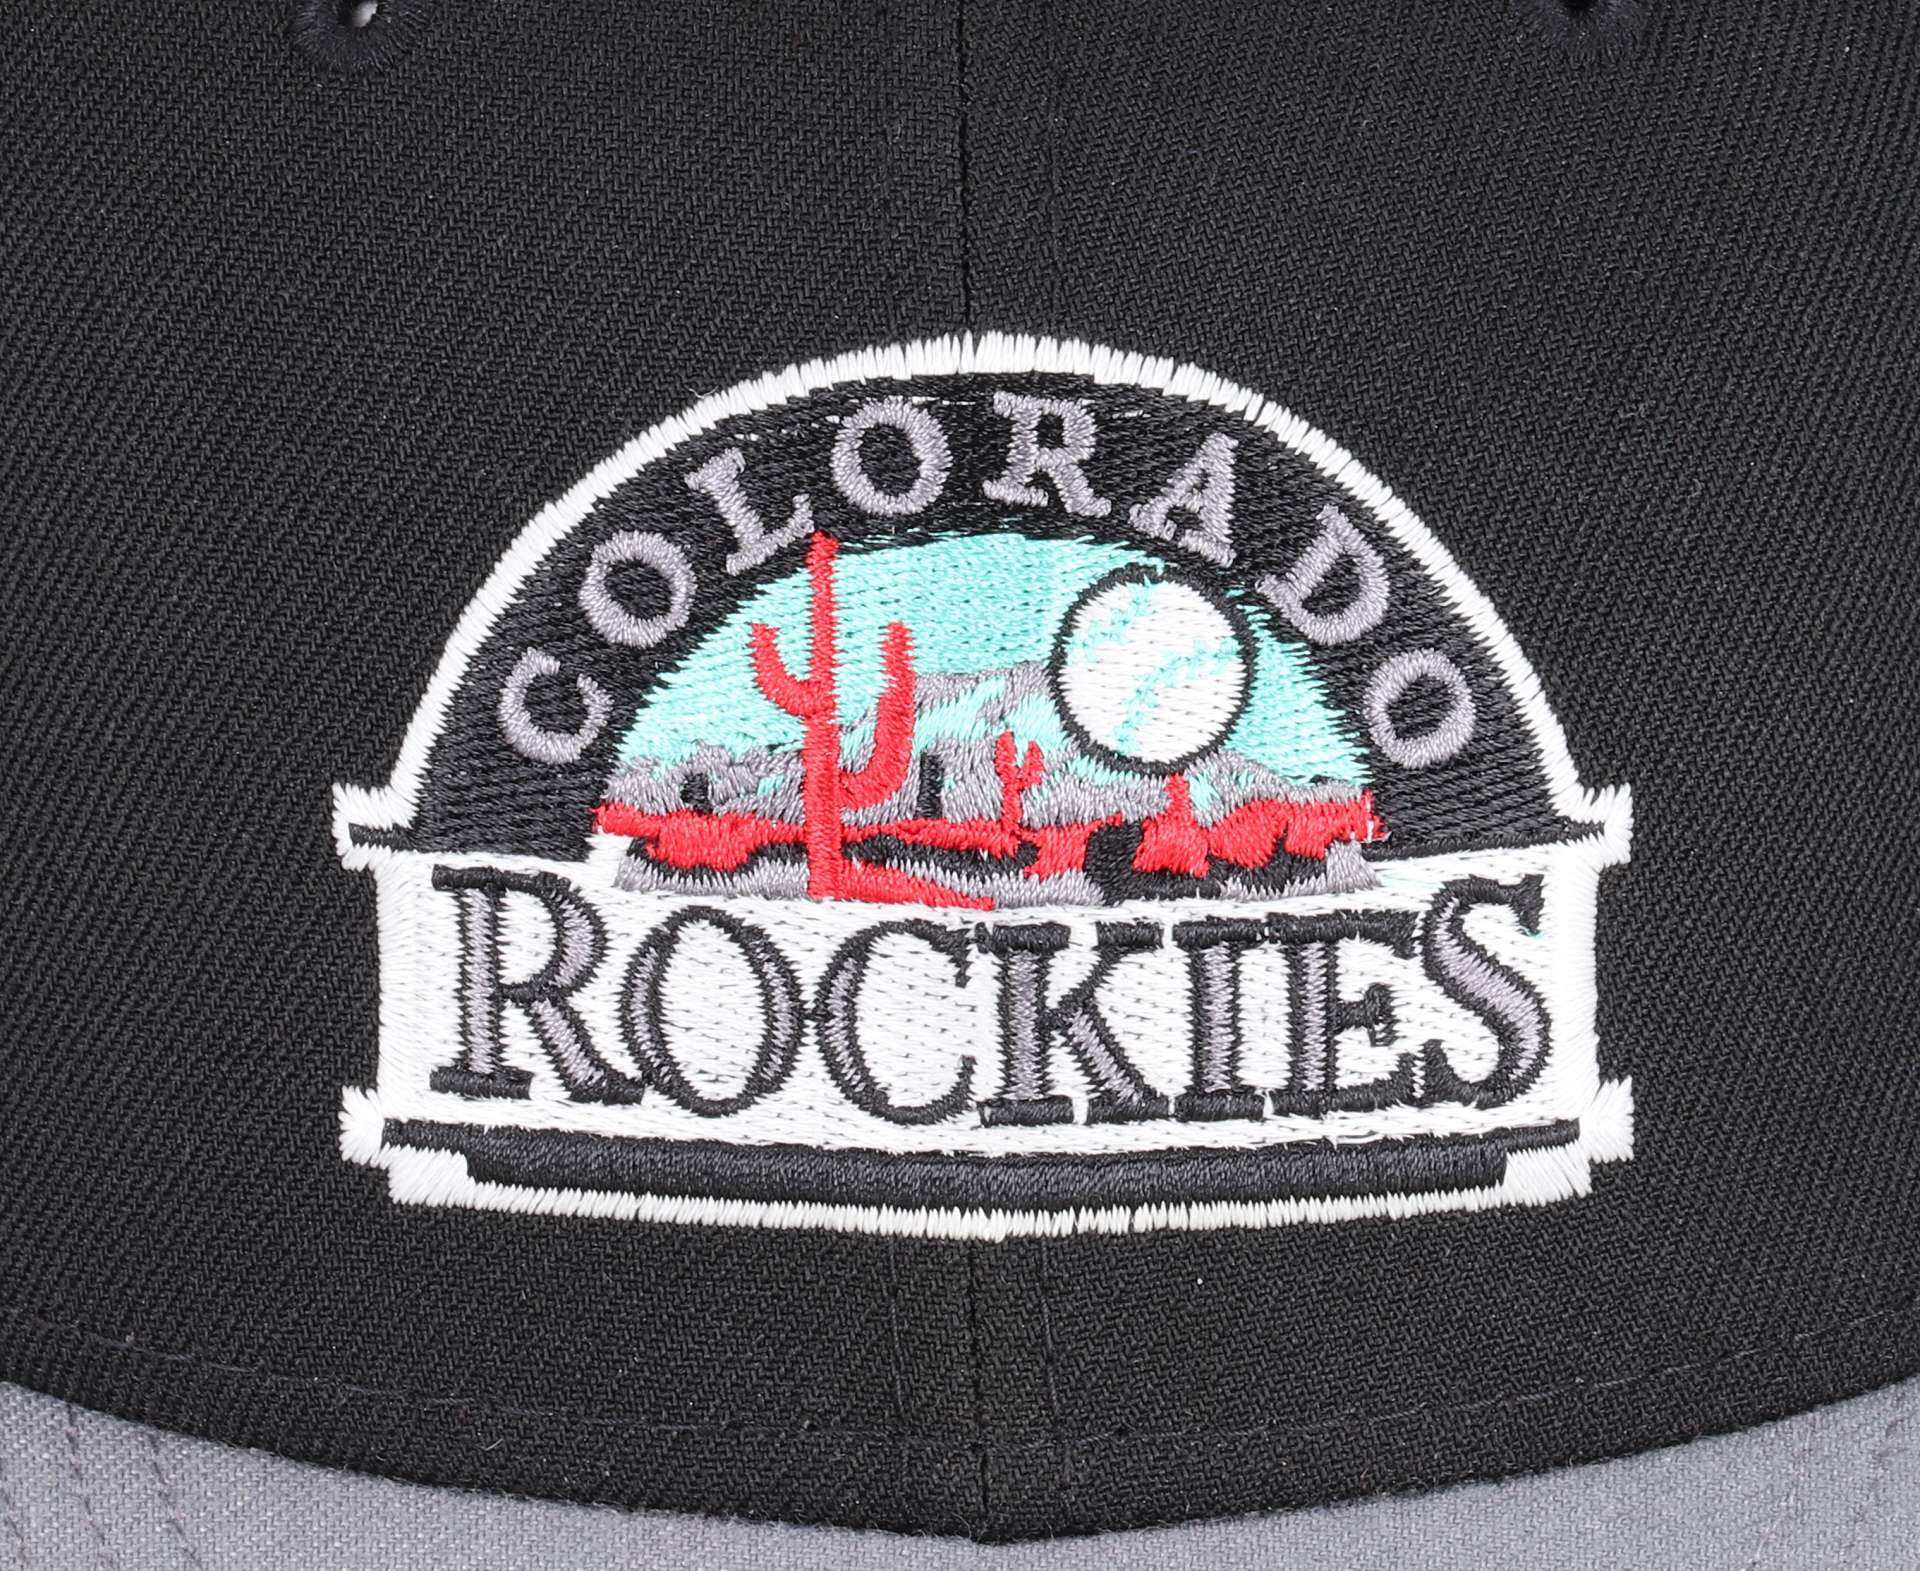 Colorado Rockies MLB Sidepatch Established 1993 Sidepatch Two-Tone Black Gray Red 59Fifty Basecap New Era